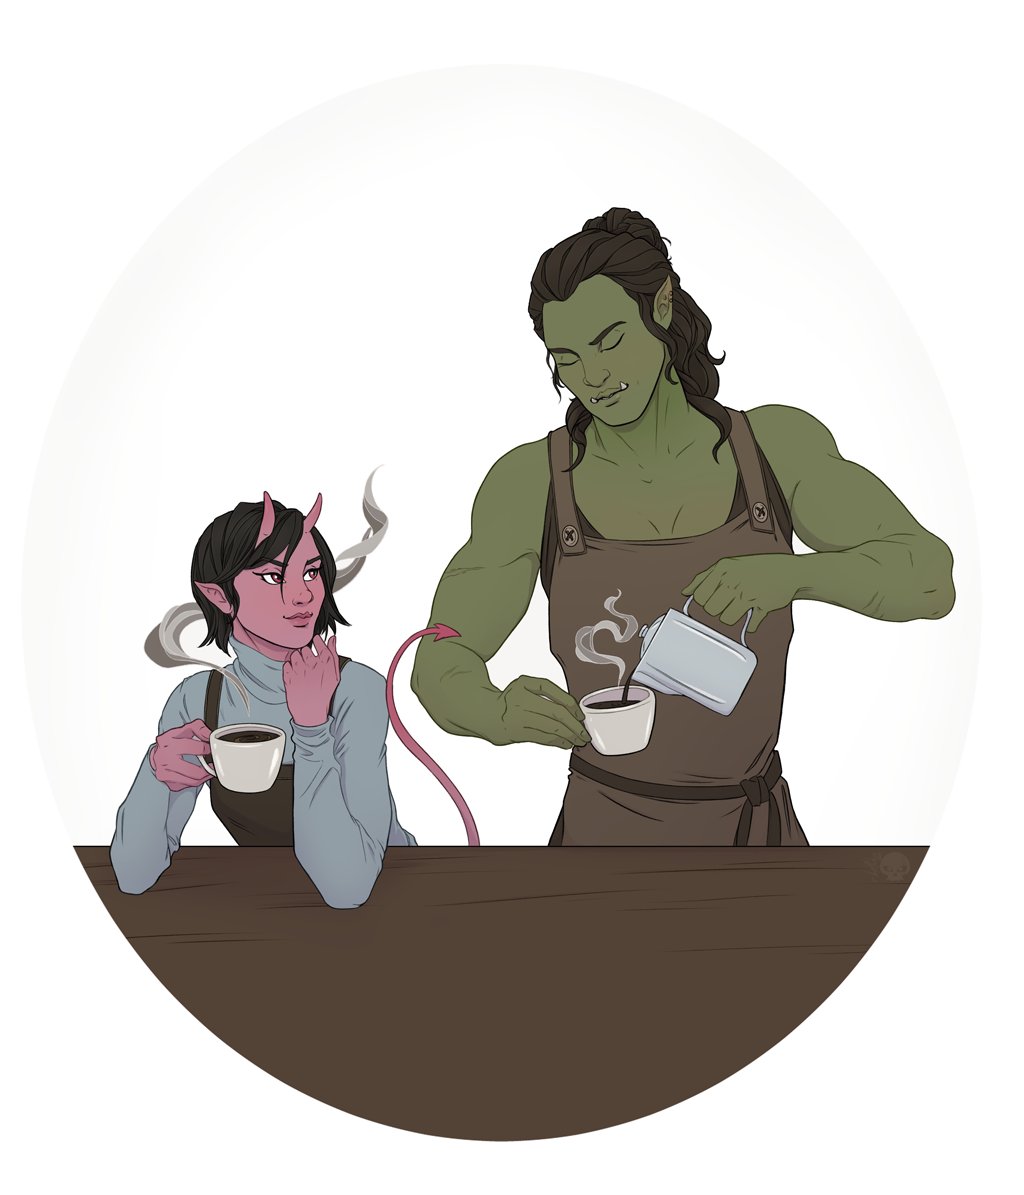 Viv and Tandri from Legends & Lattes. ☕️